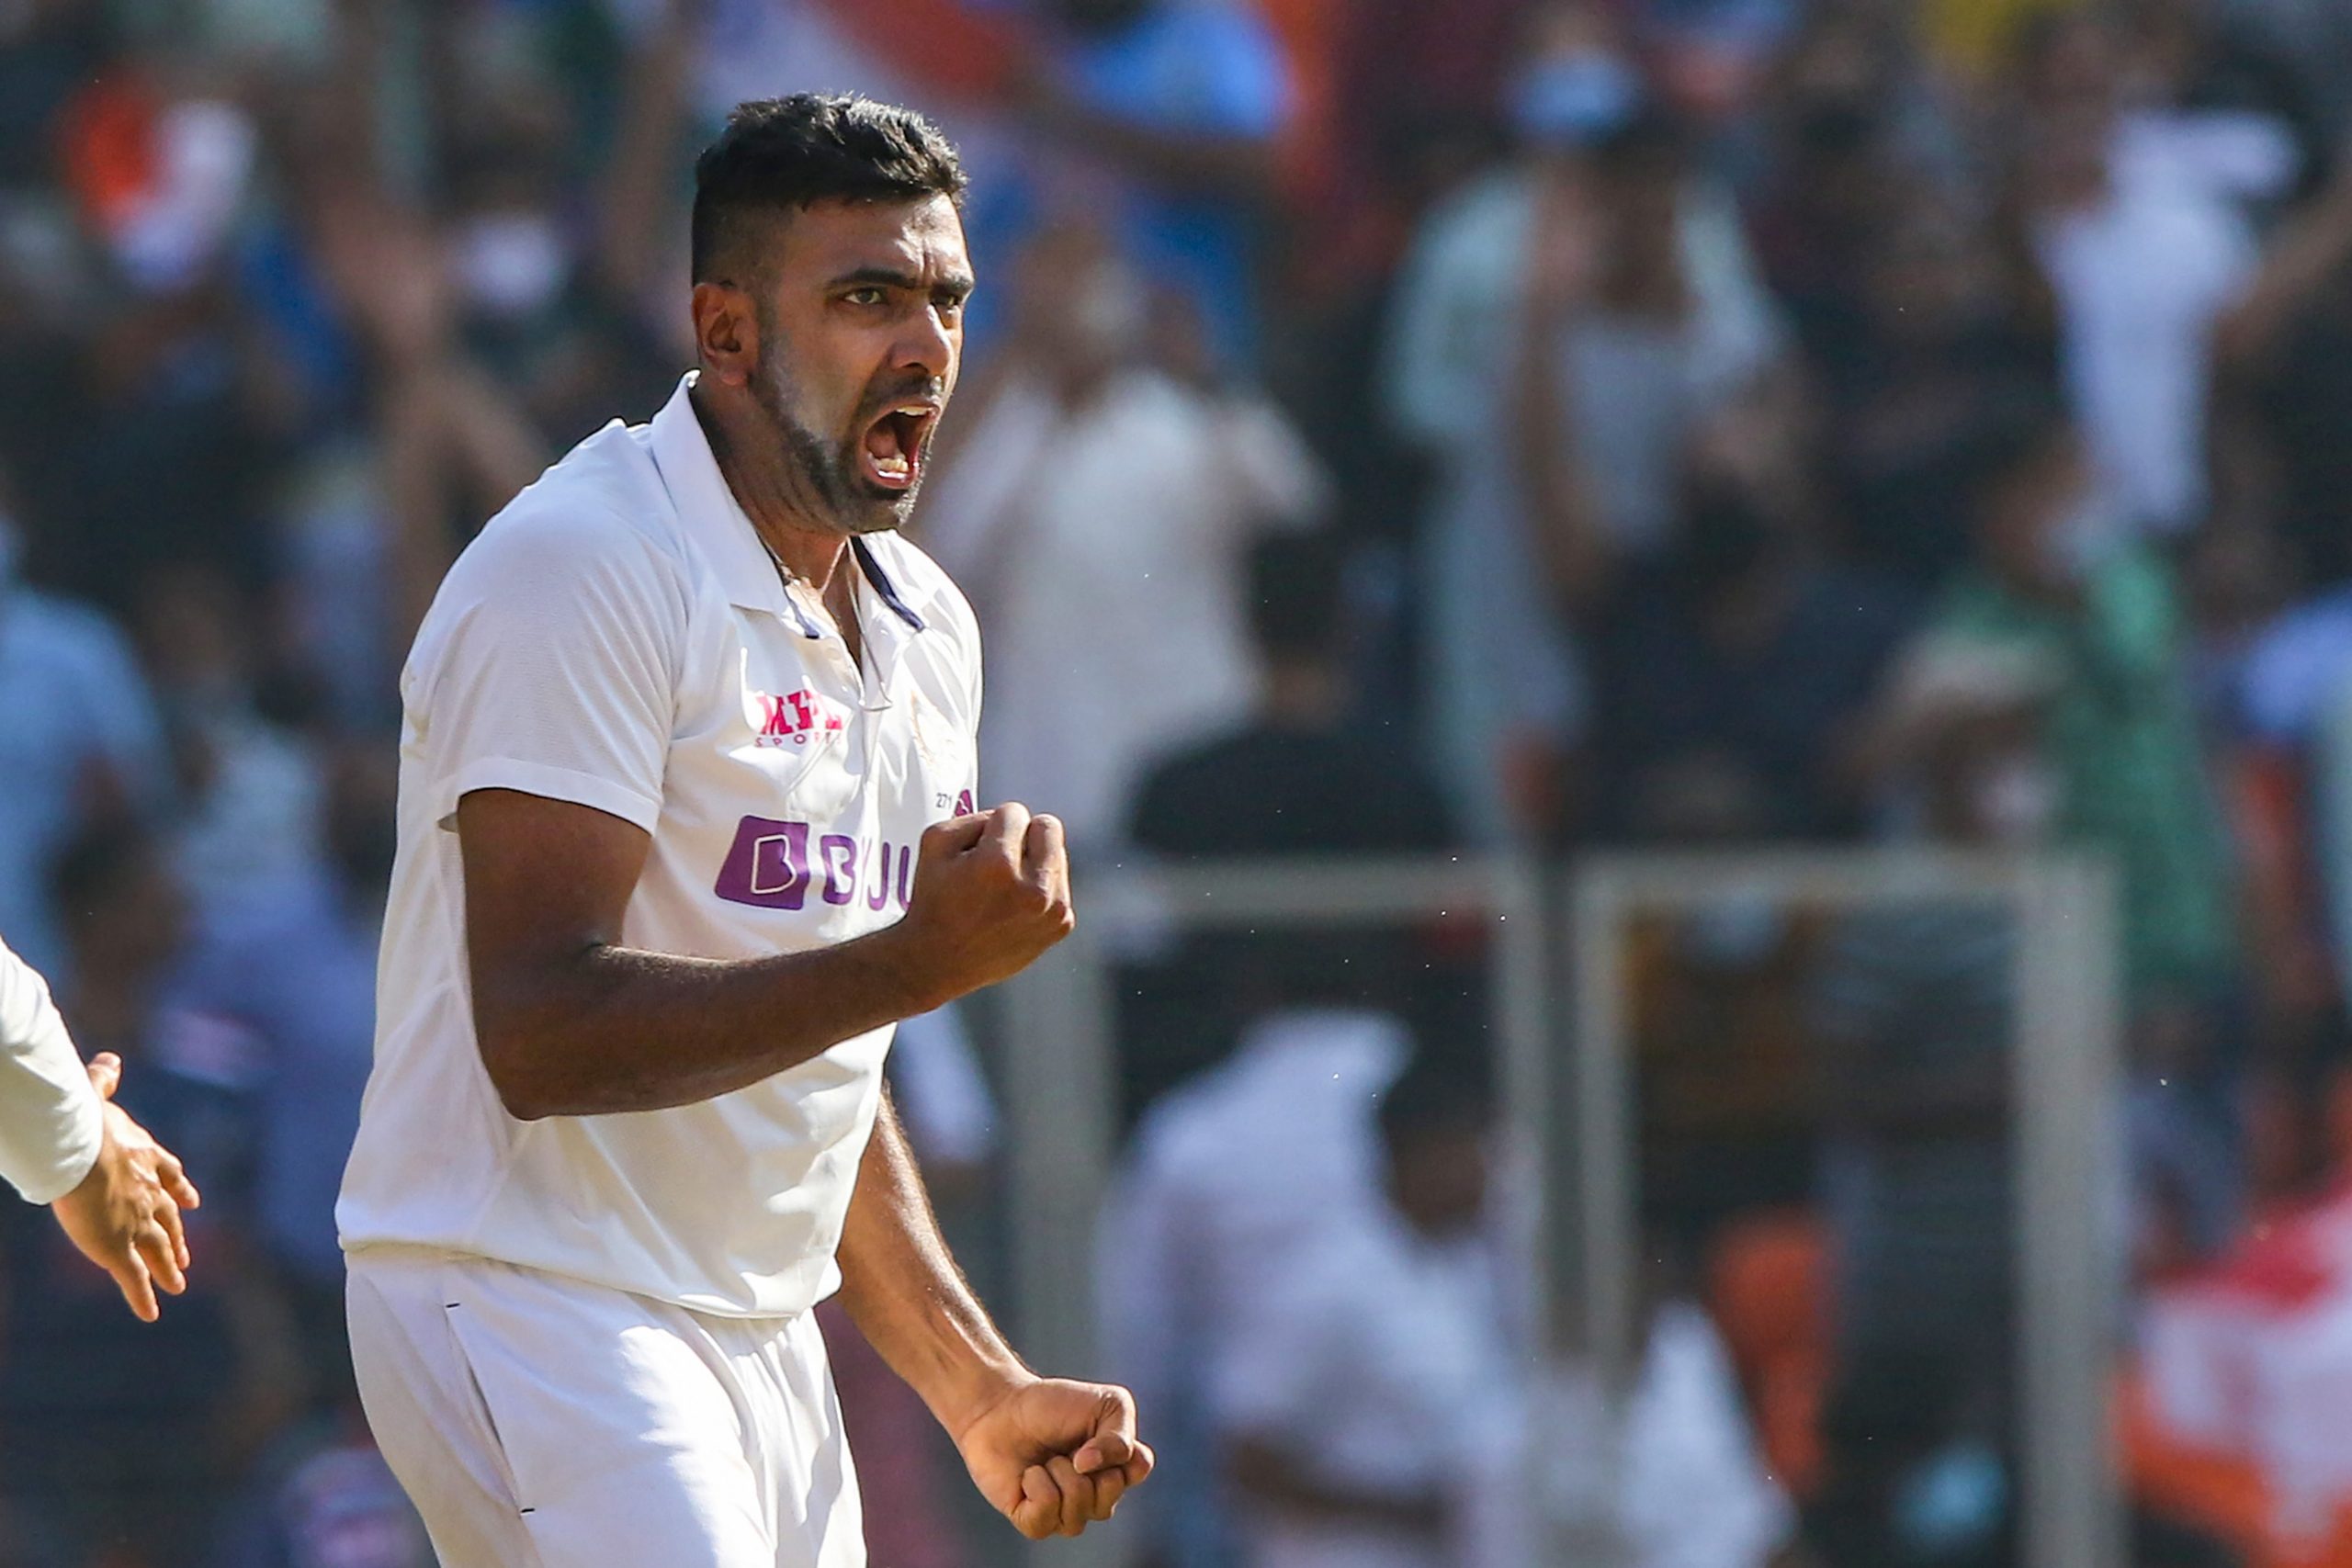 ‘The talk about the surface is getting out of hand’: Ravichandran Ashwin on Motera pitch debate